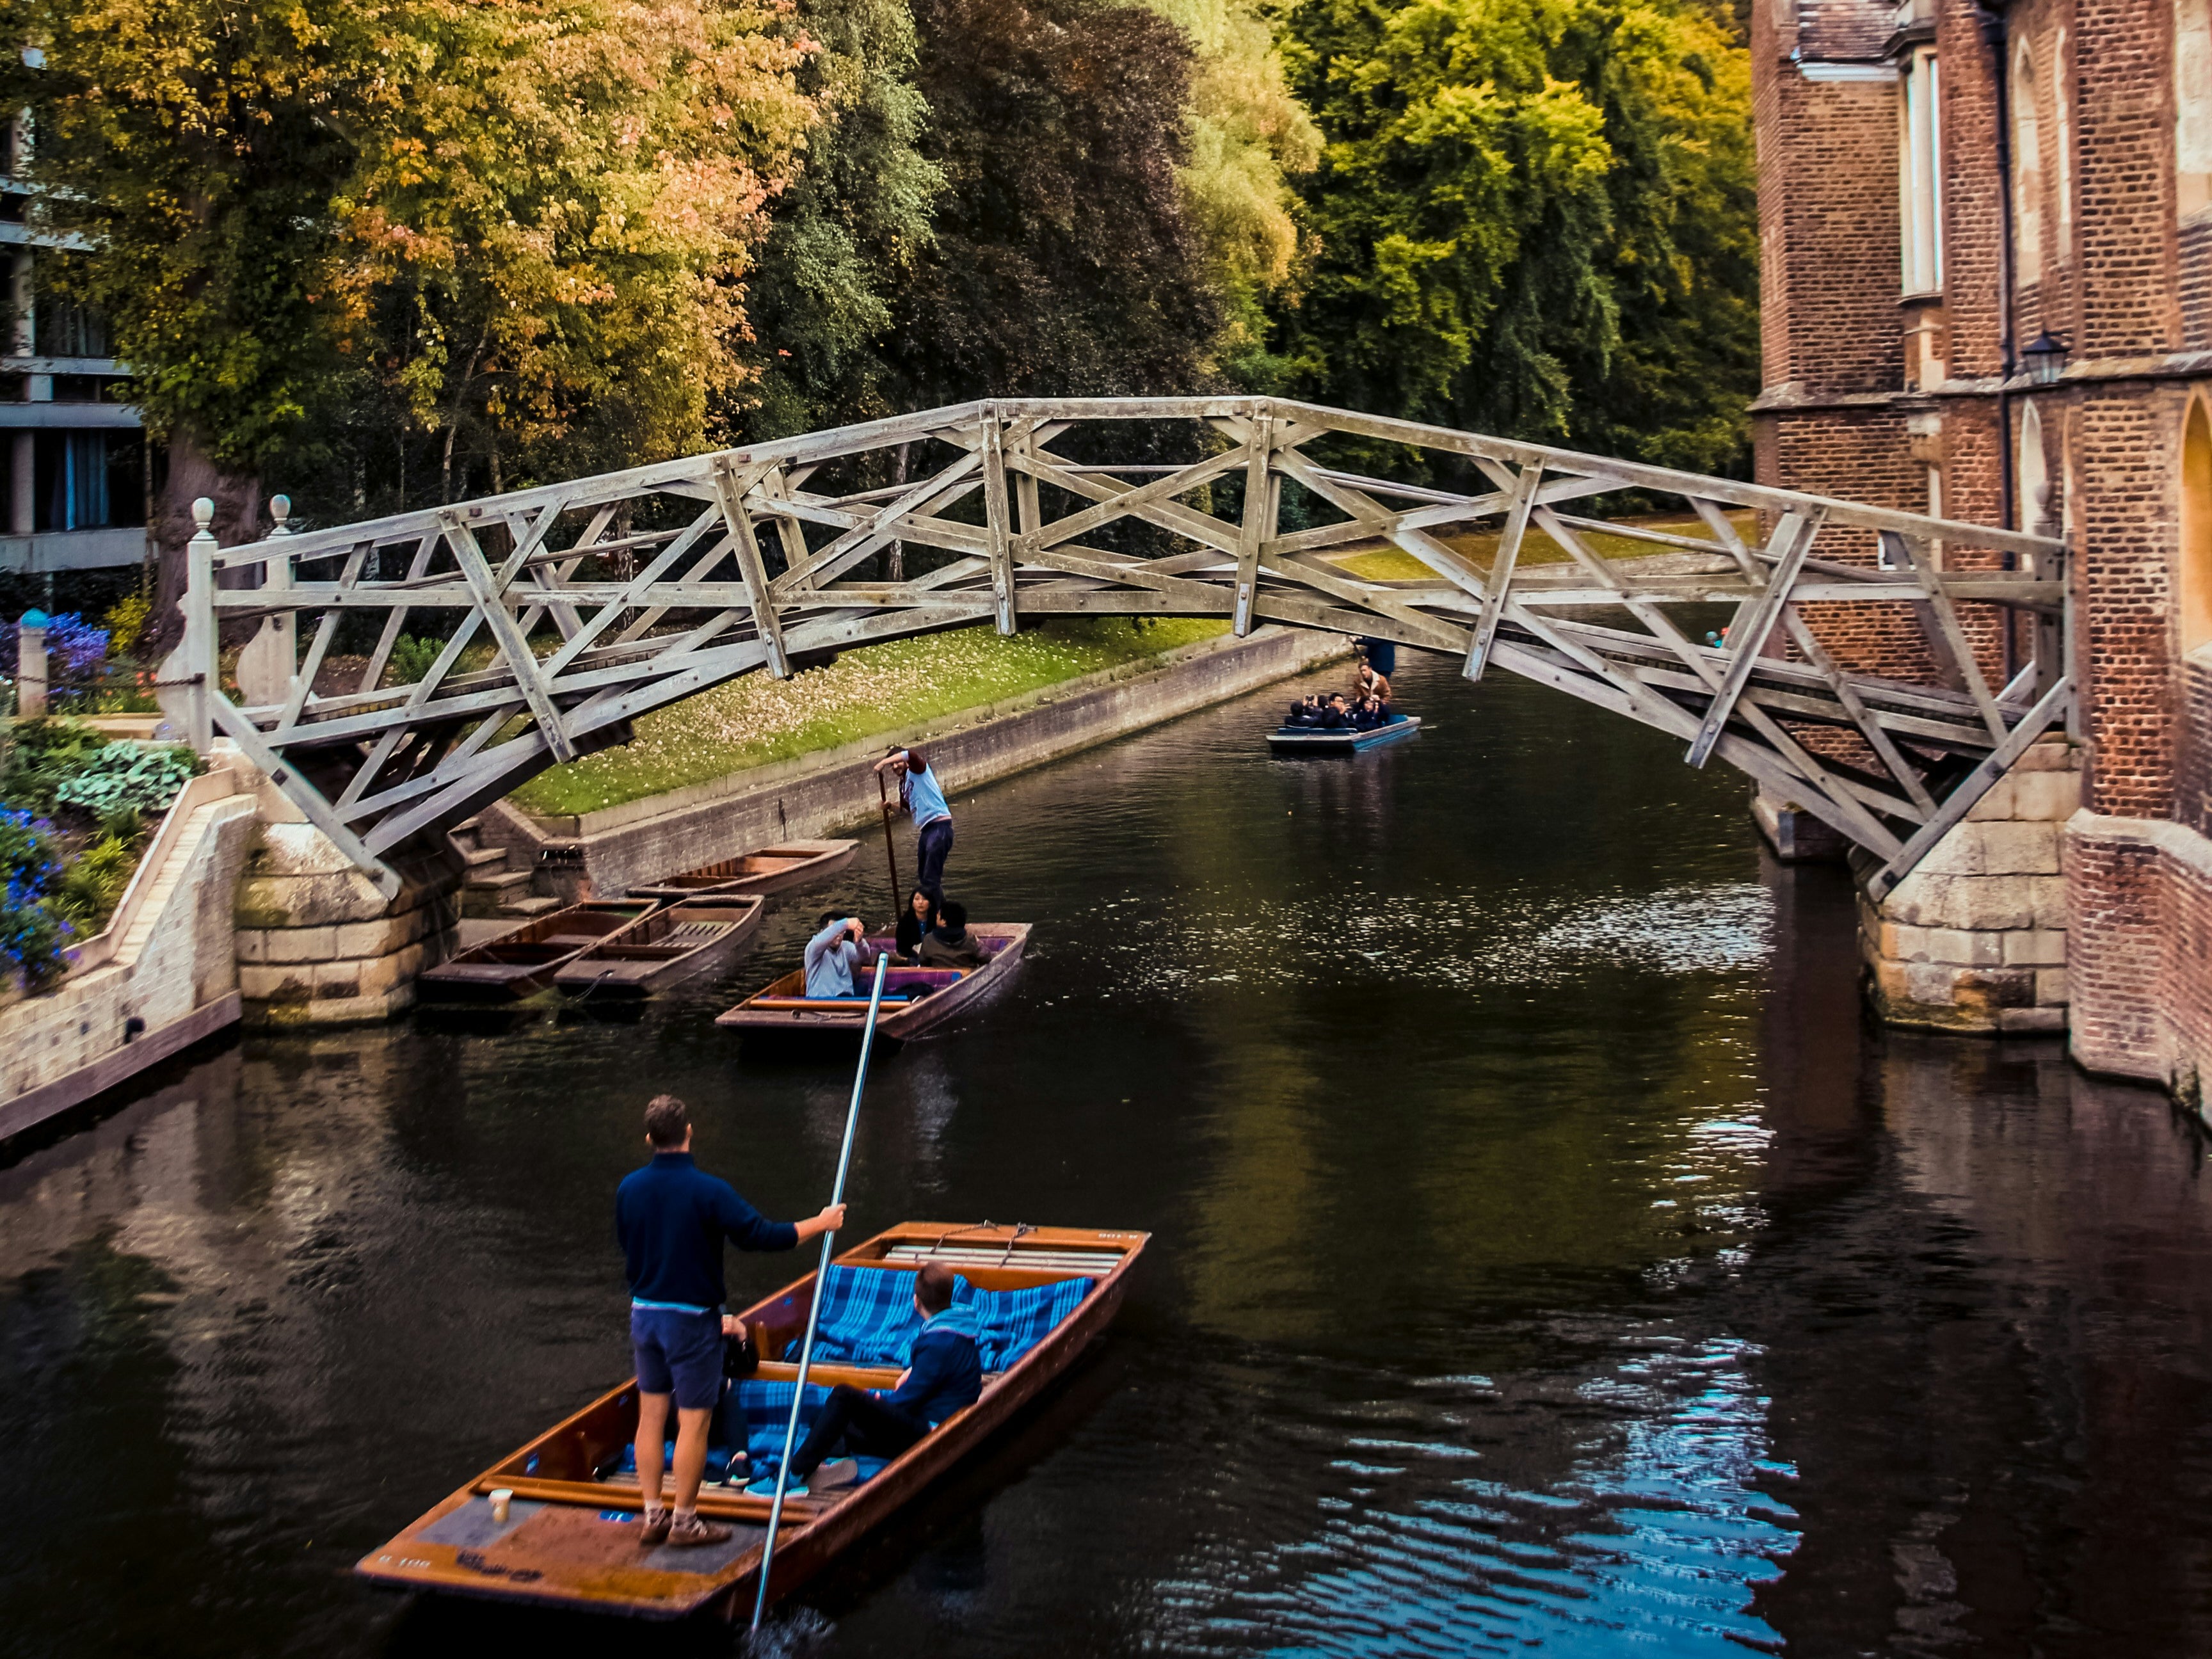 Indulge in chauffeured tours of the River Cam in a private punt for two